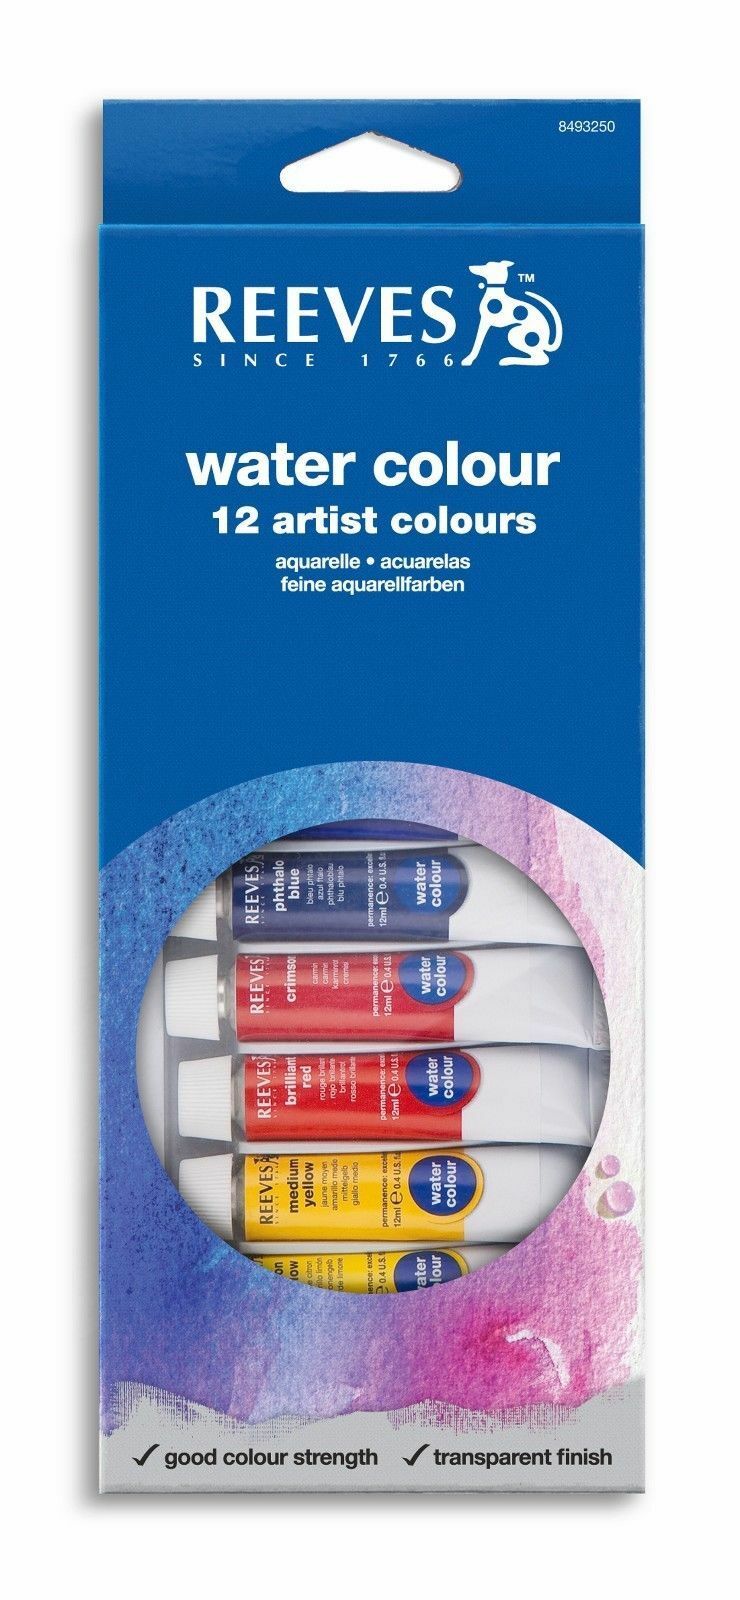 Reeves Water Colour Artists Paint Tube Sets - 12x10ml 836379 ###